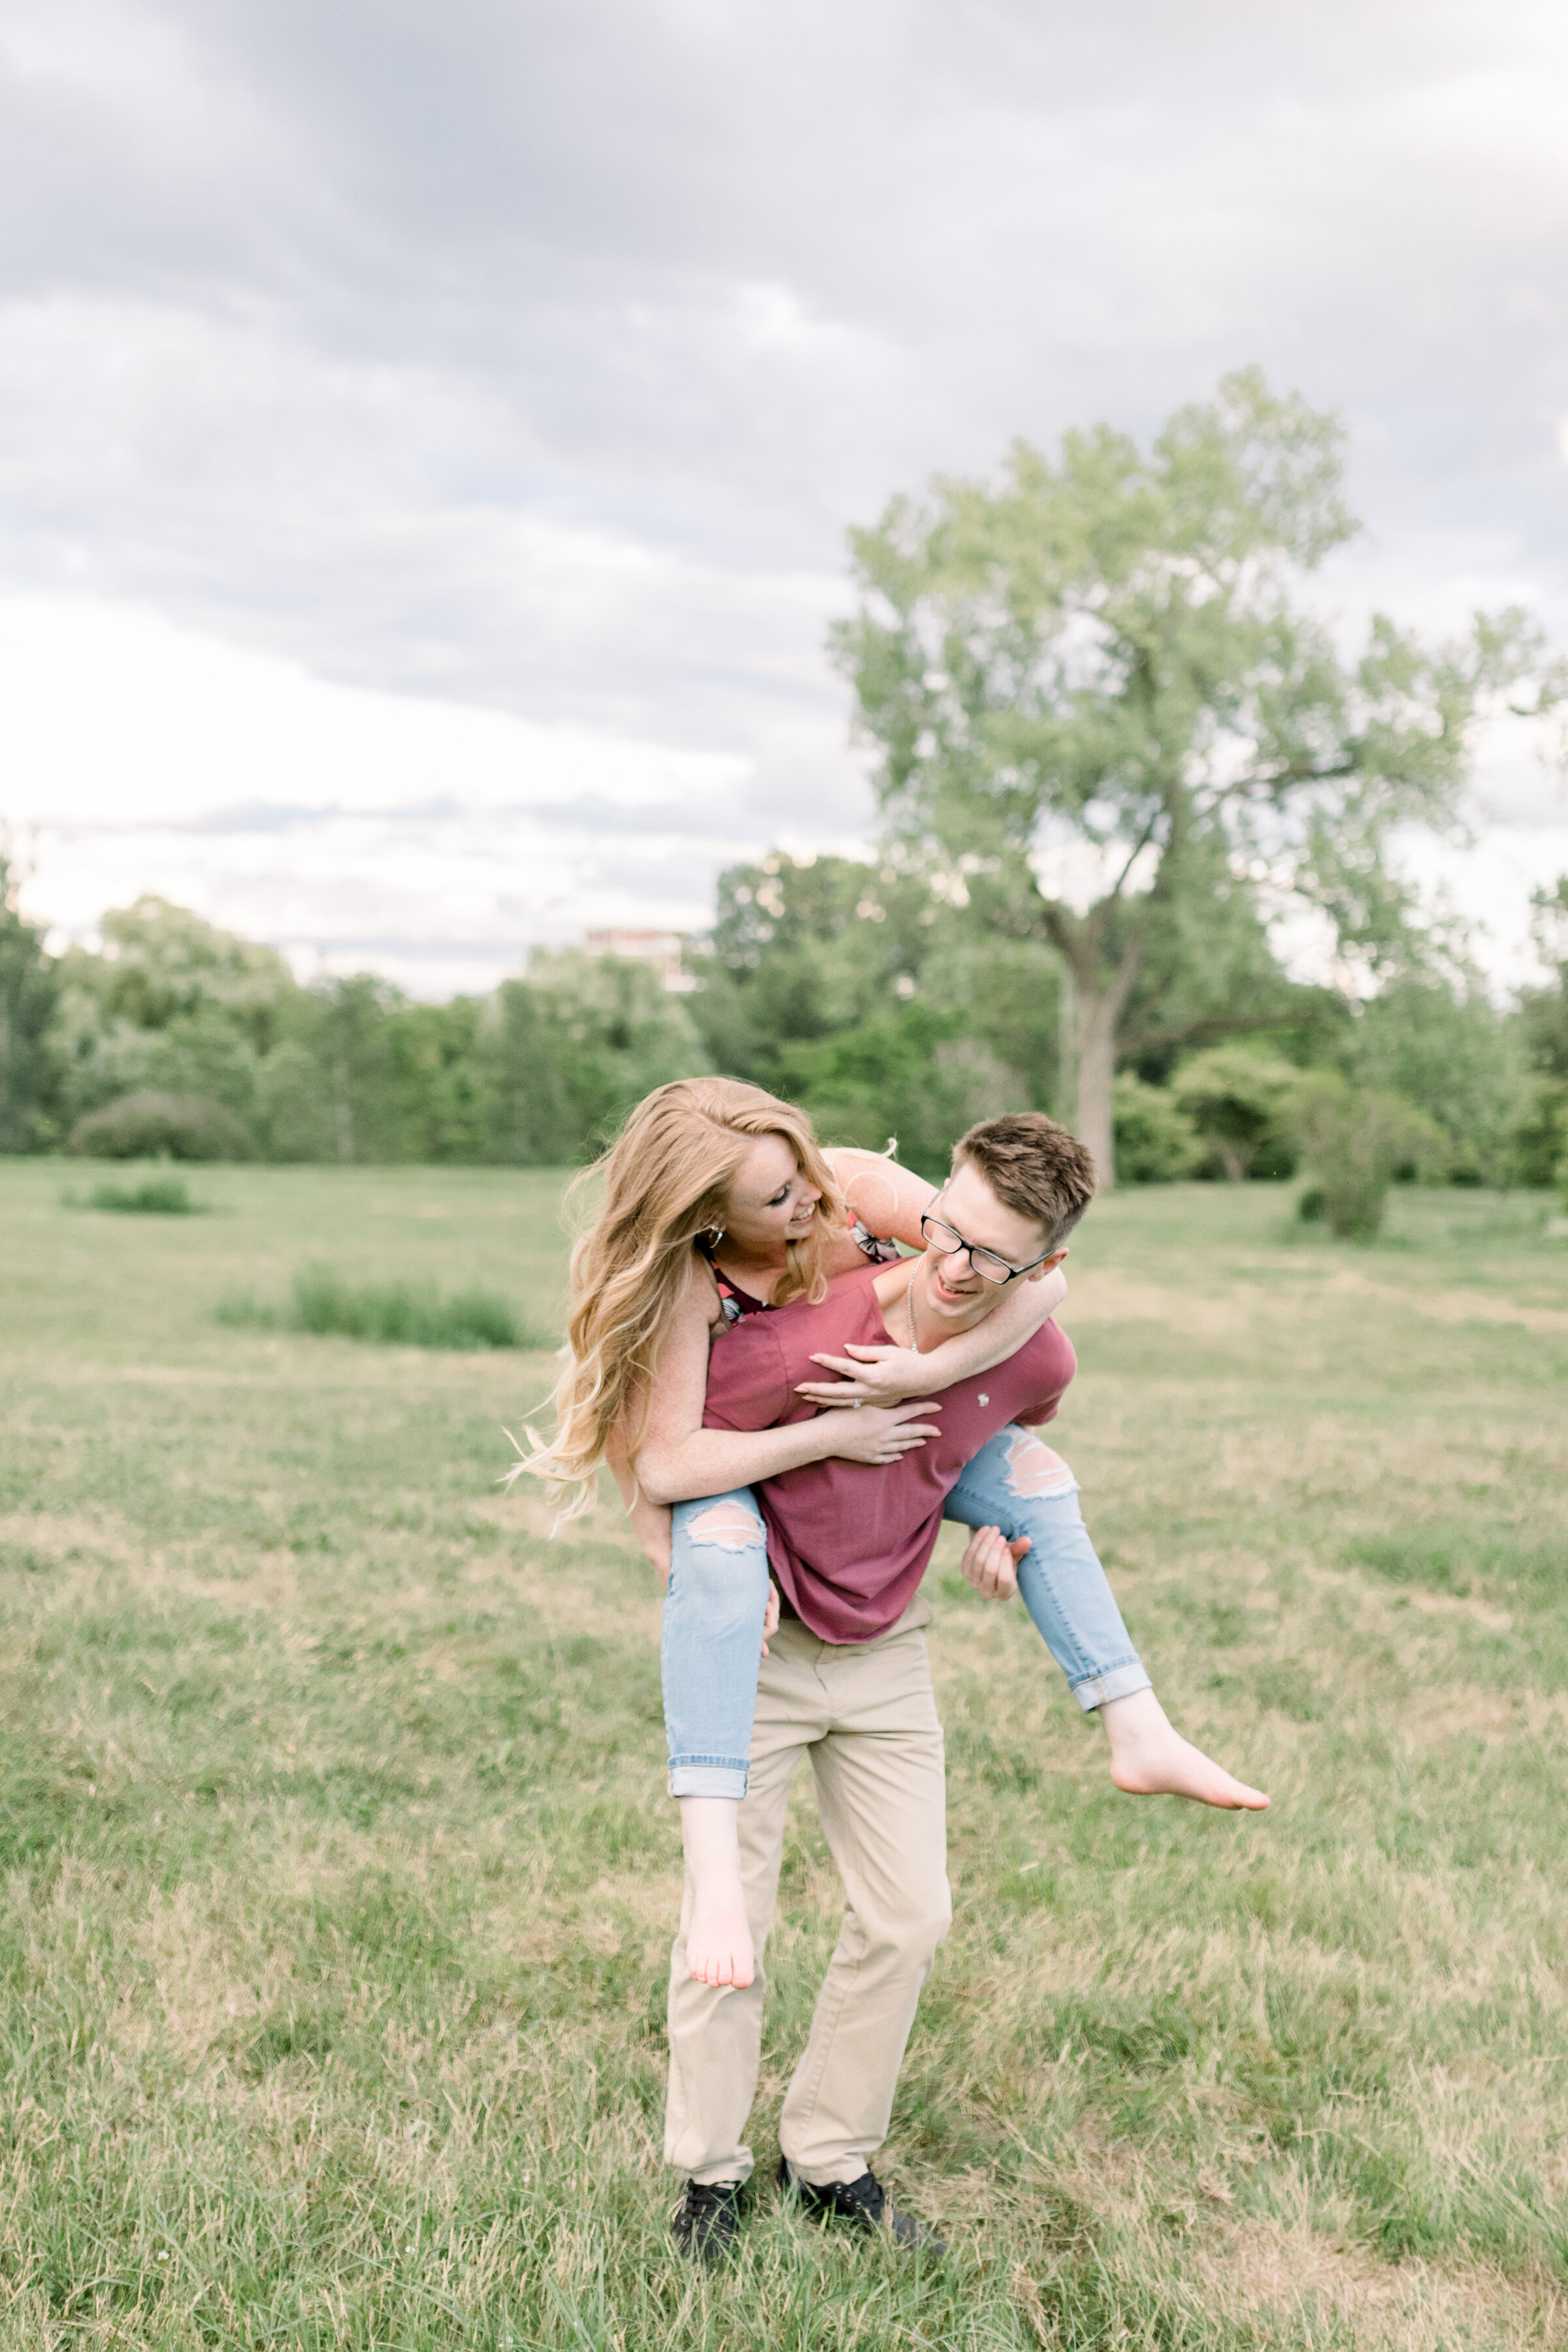  A happy man gives his laughing fiancé a piggy back ride in a playful engagement session at the Dominion Arboretum in Ottawa by Chelsea Mason Photography. Professional Ottawa photographer engagement photographer playful couple pose inspiration ideas 